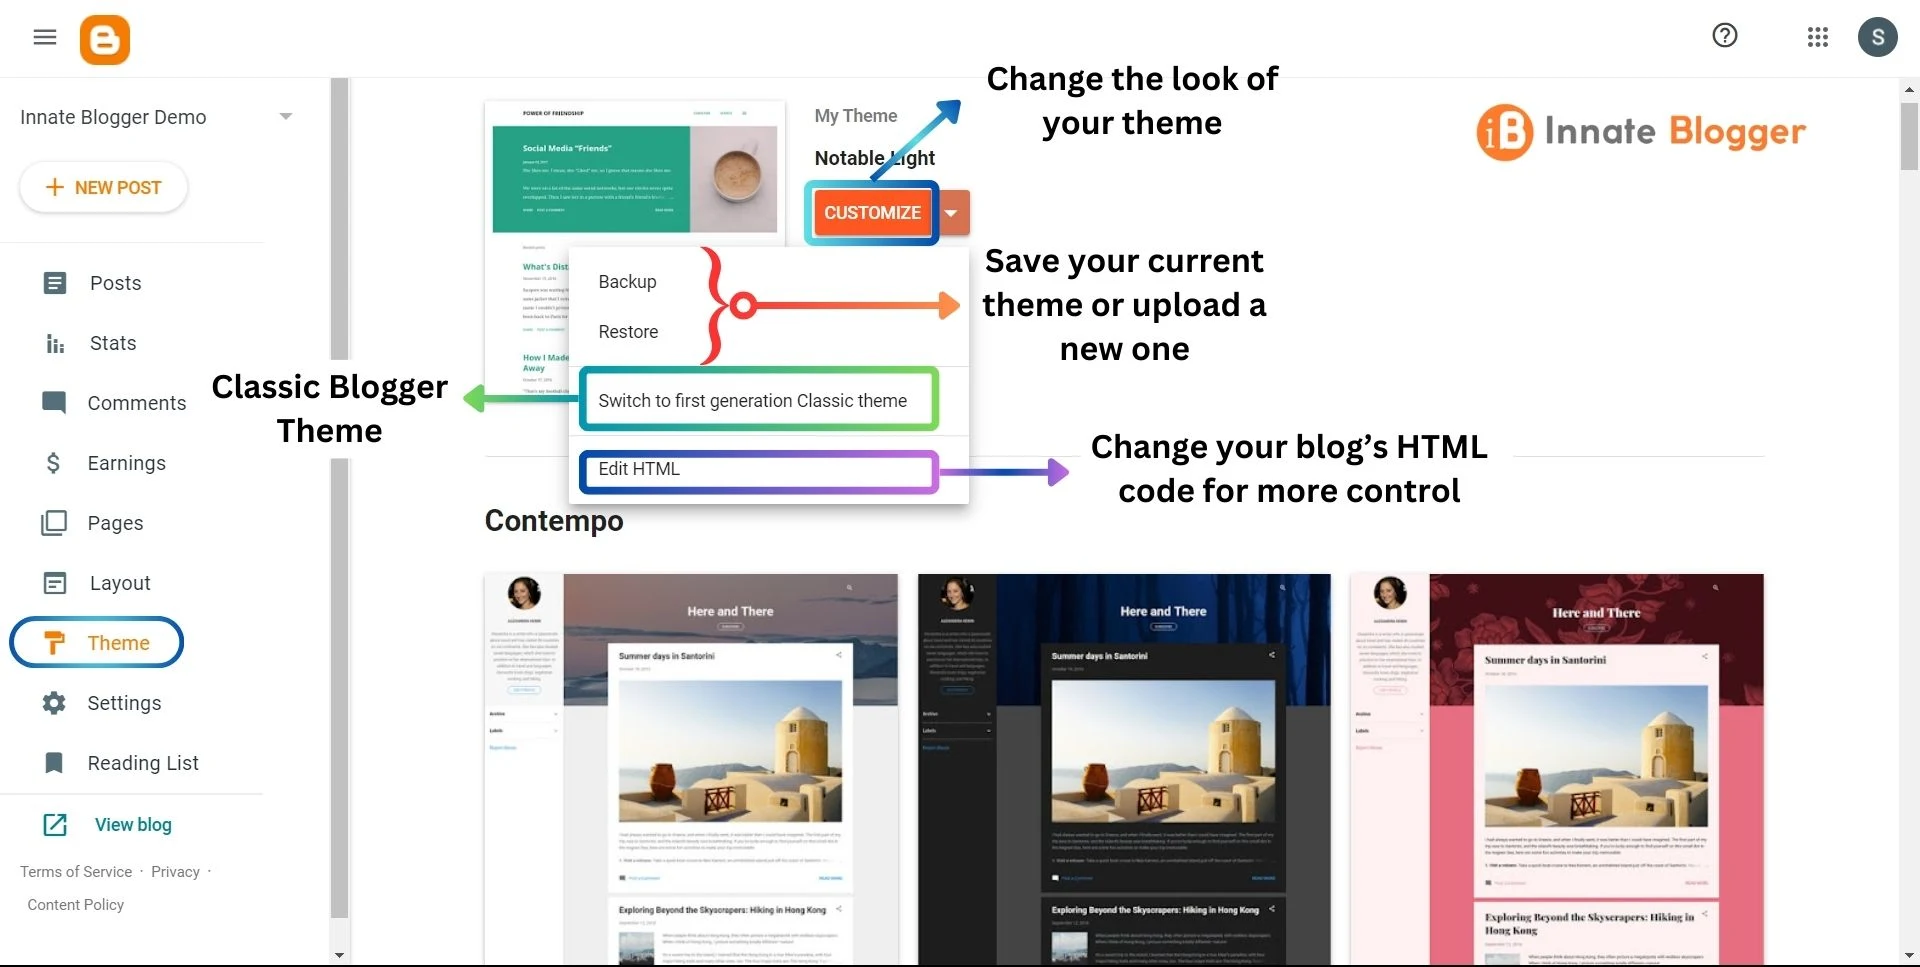 Blogger Dashboard Themes Section Overview